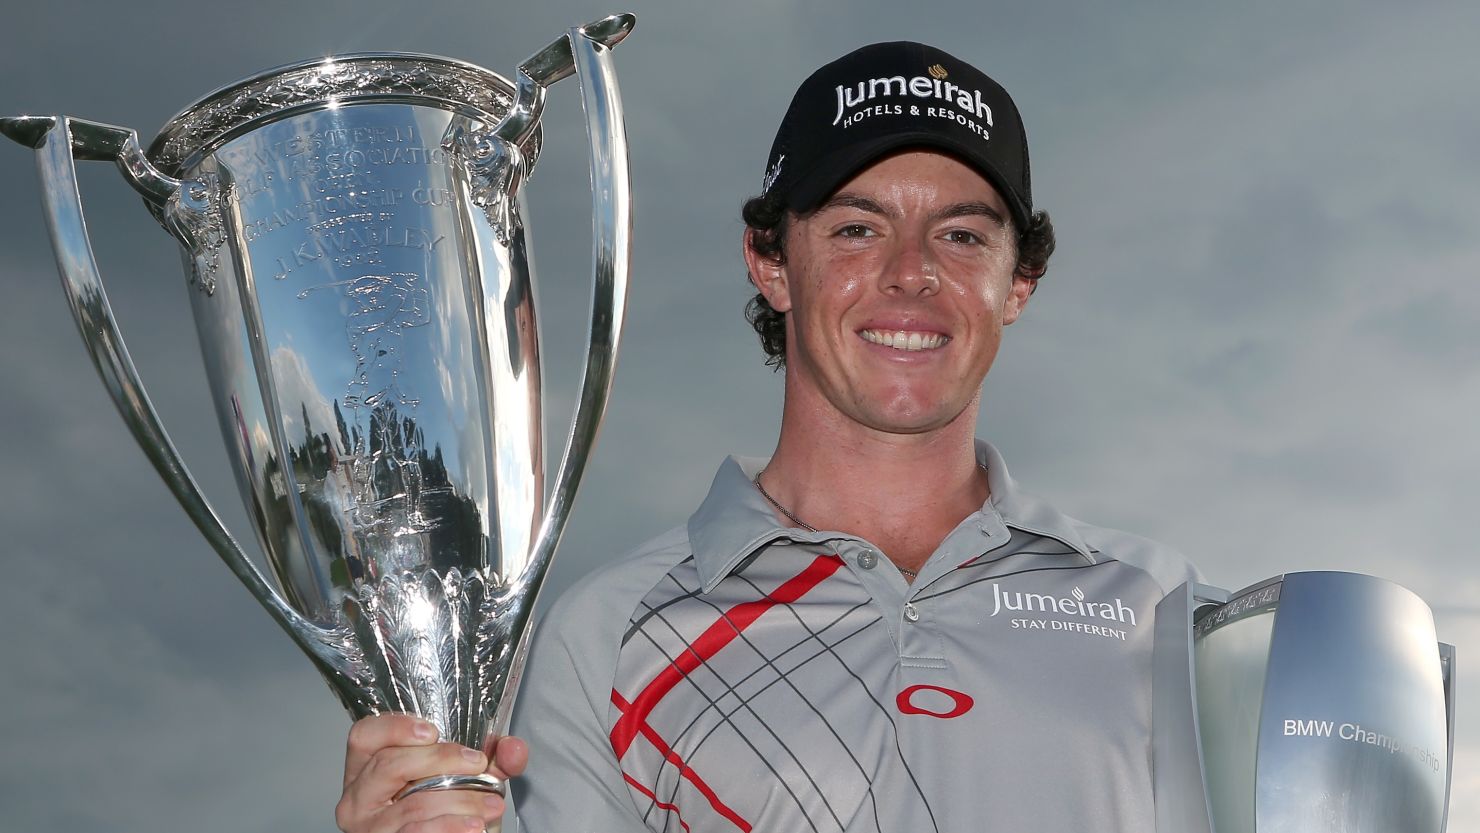 Rory McIlroy has won three of his last four tournaments, taking his earnings this season to more than $7.8 million.